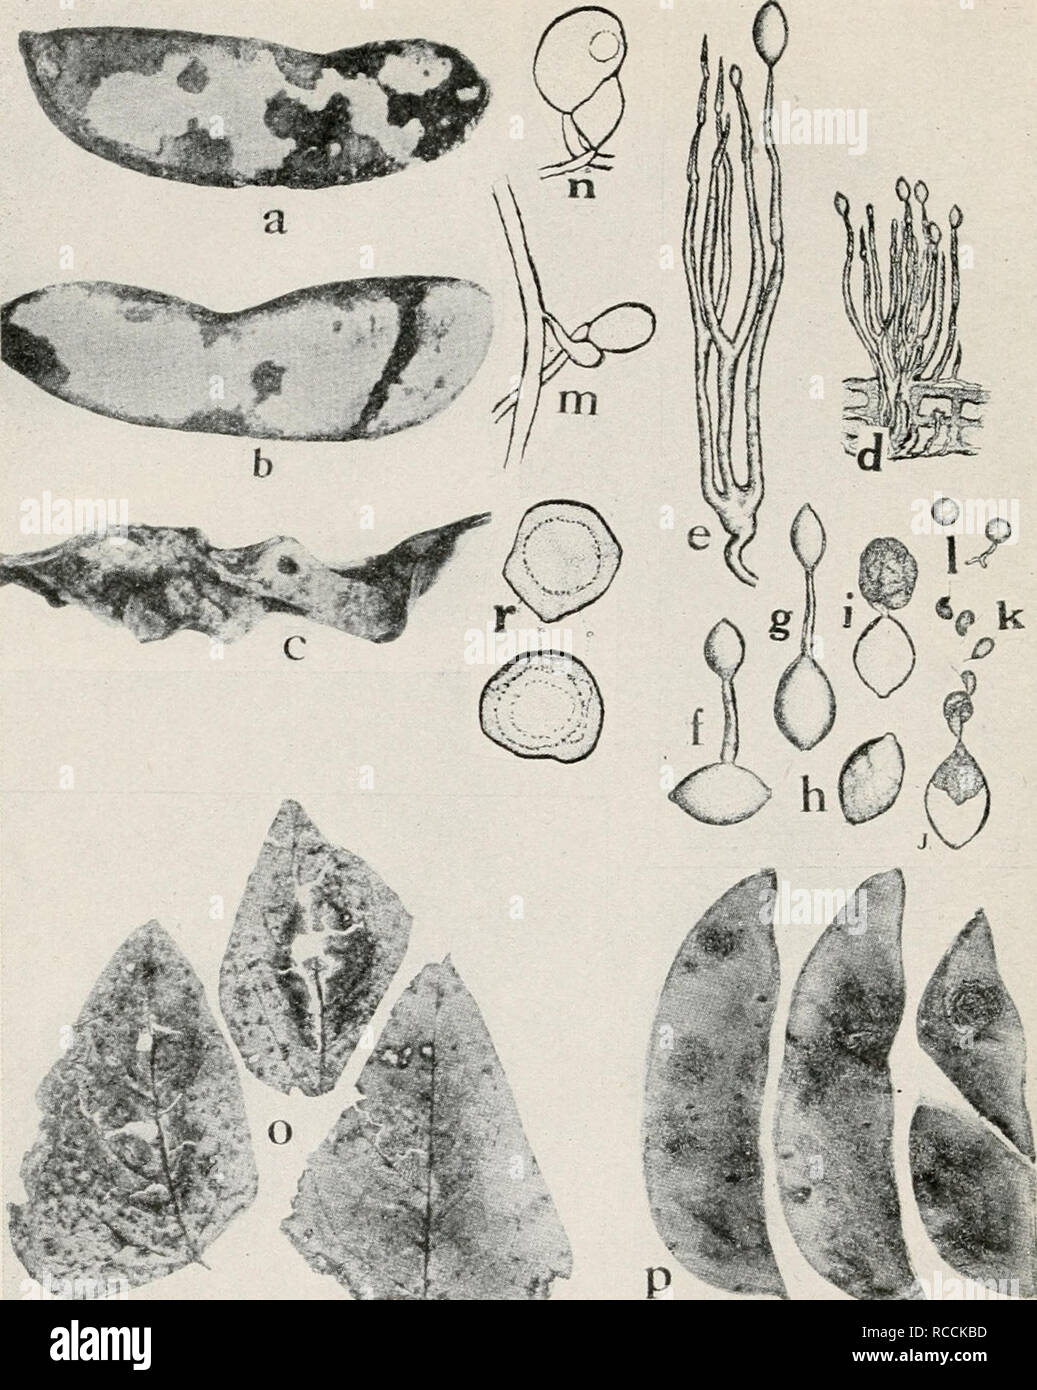 . Diseases of truck crops and their control. Plants -- Diseases. Fig. 48. Diseases of Lima Bean. a. h. c. different stages of downy mildew on pods, d. tuft of conidiophores and conidia of Phylhophthora phaseoli, e. same as d. but greatly enlarged, /. g. conidia germinating by means of a germ tube, h. i. j. k. germination of conidia by means of zoospores, /. germinating zoospores {d. to /. after Thaxter), m. n. fertilization of the oogonium by the antheridium, o. Phoma blight on foliage, p. Phoma blight on pods (o. and p. after Halsted), r. mature oospores of P. phaseoli (a. to c, m. n. and r.  Stock Photo